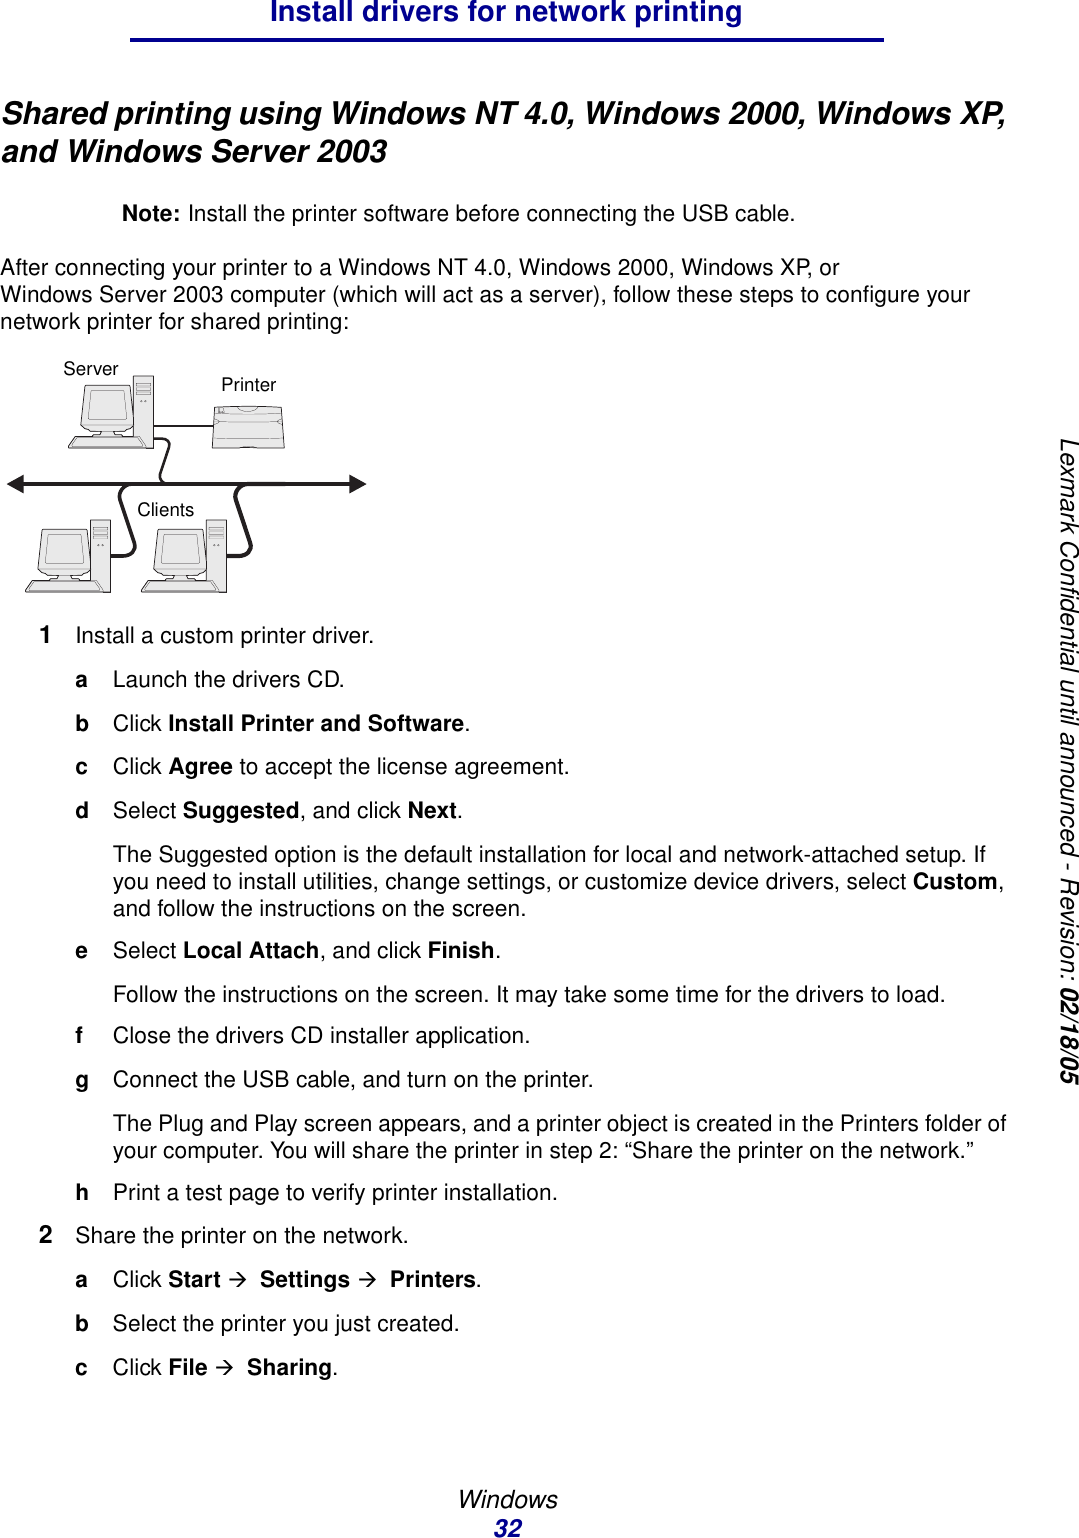 Windows32Install drivers for network printingLexmark Confidential until announced - Revision: 02/18/05Shared printing using Windows NT 4.0, Windows 2000, Windows XP, and Windows Server 2003Note: Install the printer software before connecting the USB cable.After connecting your printer to a Windows NT 4.0, Windows 2000, Windows XP, or Windows Server 2003 computer (which will act as a server), follow these steps to configure your network printer for shared printing:1Install a custom printer driver.aLaunch the drivers CD.bClick Install Printer and Software.cClick Agree to accept the license agreement.dSelect Suggested, and click Next.The Suggested option is the default installation for local and network-attached setup. If you need to install utilities, change settings, or customize device drivers, select Custom, and follow the instructions on the screen.eSelect Local Attach, and click Finish.Follow the instructions on the screen. It may take some time for the drivers to load.fClose the drivers CD installer application.gConnect the USB cable, and turn on the printer.The Plug and Play screen appears, and a printer object is created in the Printers folder of your computer. You will share the printer in step 2: “Share the printer on the network.”hPrint a test page to verify printer installation.2Share the printer on the network.aClick Start Æ  Settings Æ  Printers.bSelect the printer you just created.cClick File Æ  Sharing.ServerClientsPrinter